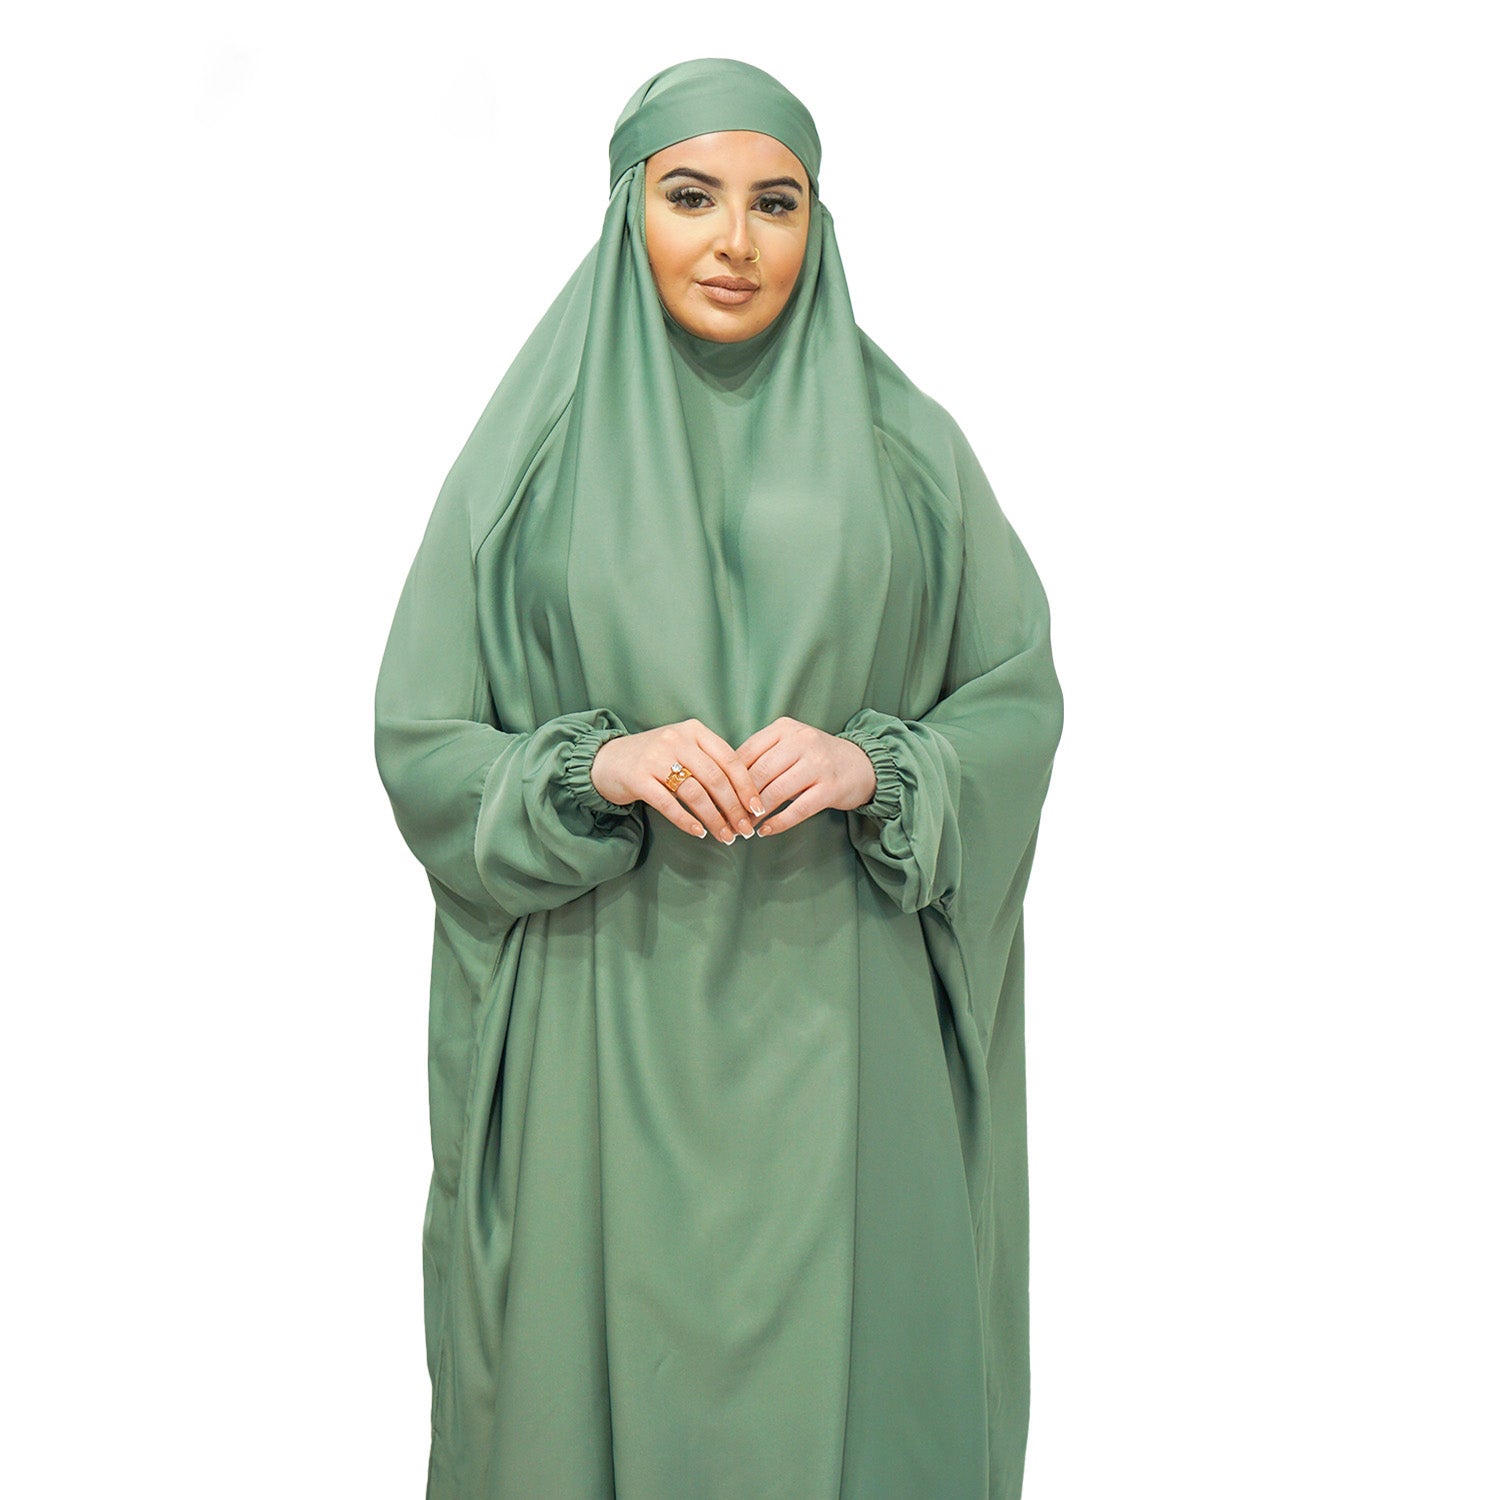 almanaar Islamic Store Abayas, Thobes, Hijabs, Perfumes, Gifts, Book picture pic